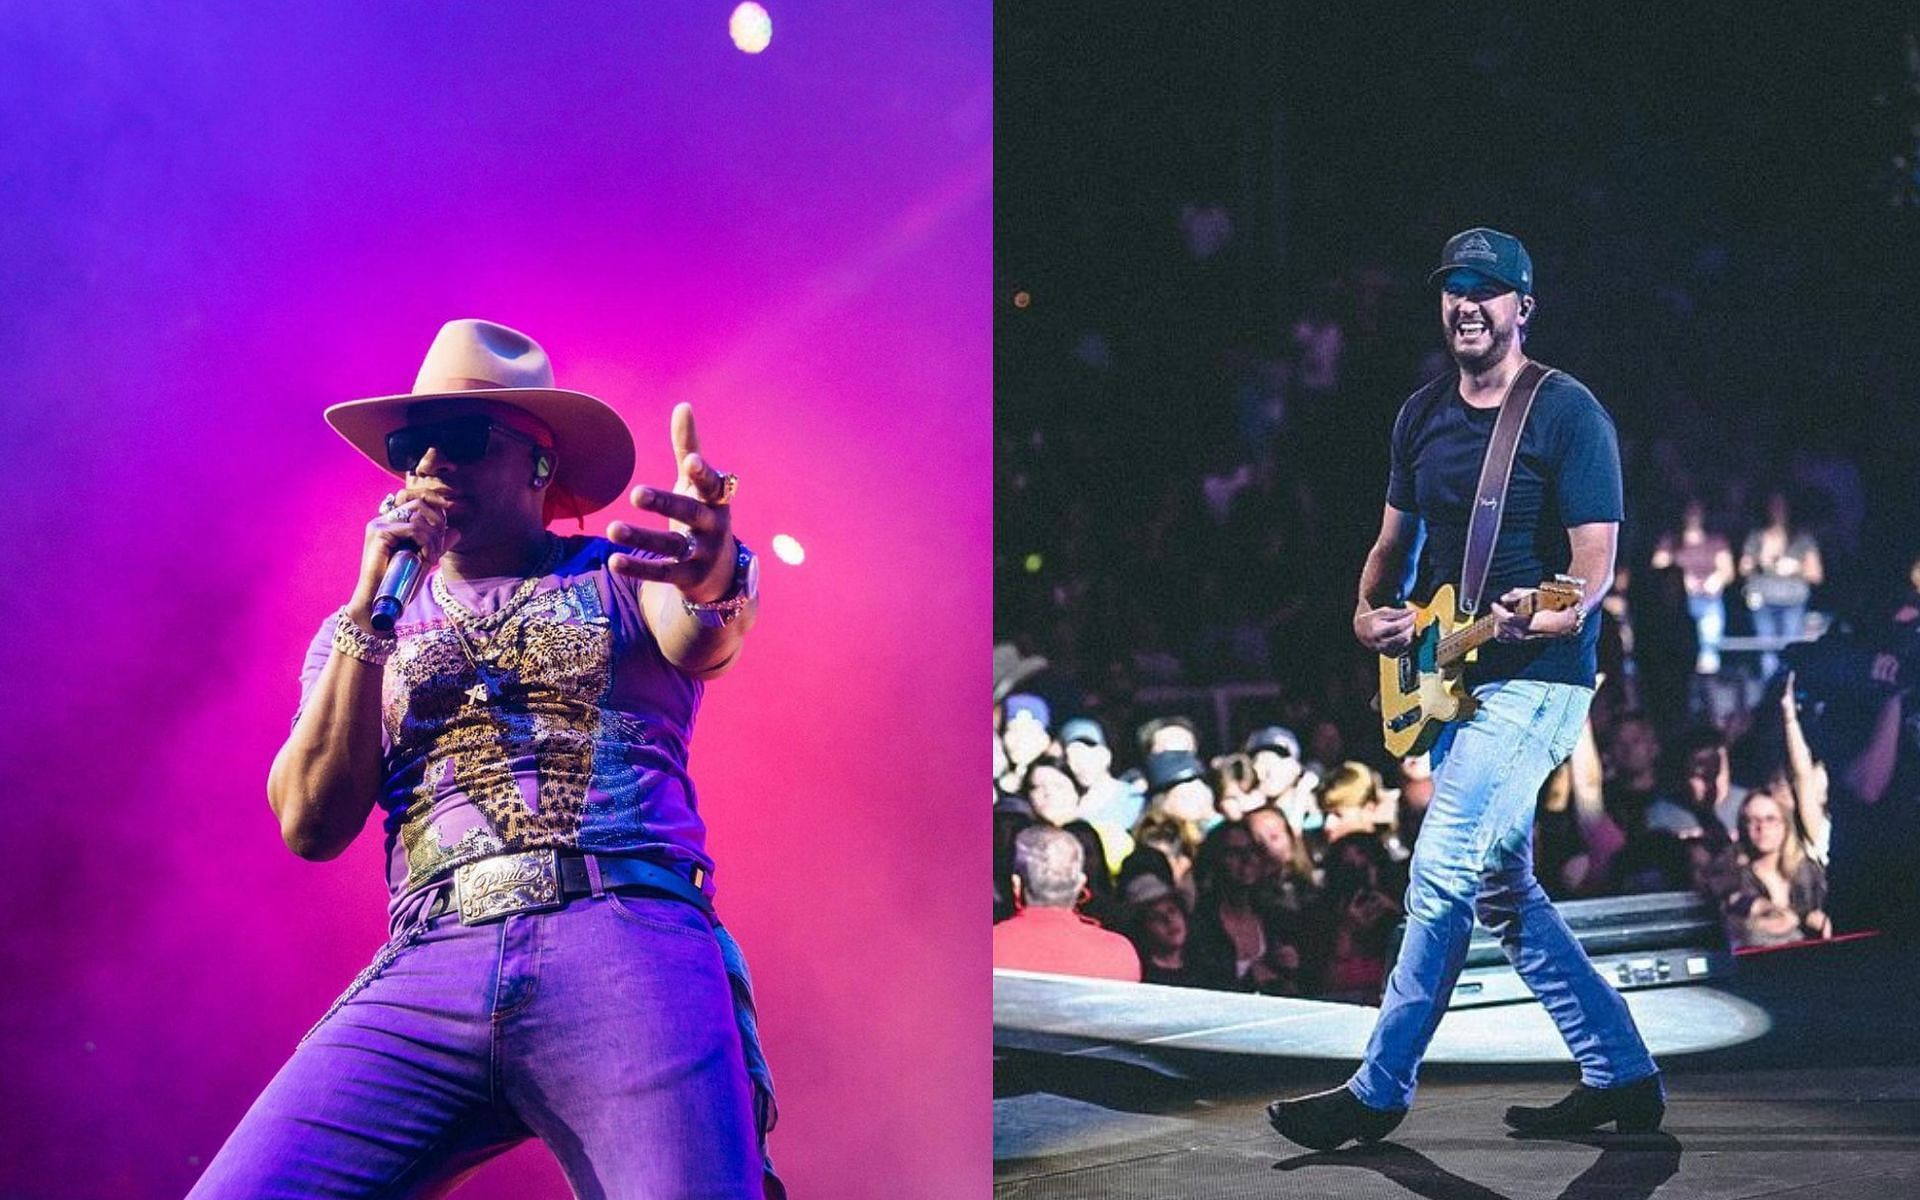 Jimmie Allen and Luke Bryan to perform at &#039;New Year&#039;s Eve Live: Nashville&#039;s Big Bash&#039; (Image via Instagram/jimmieallen and lukebryan)